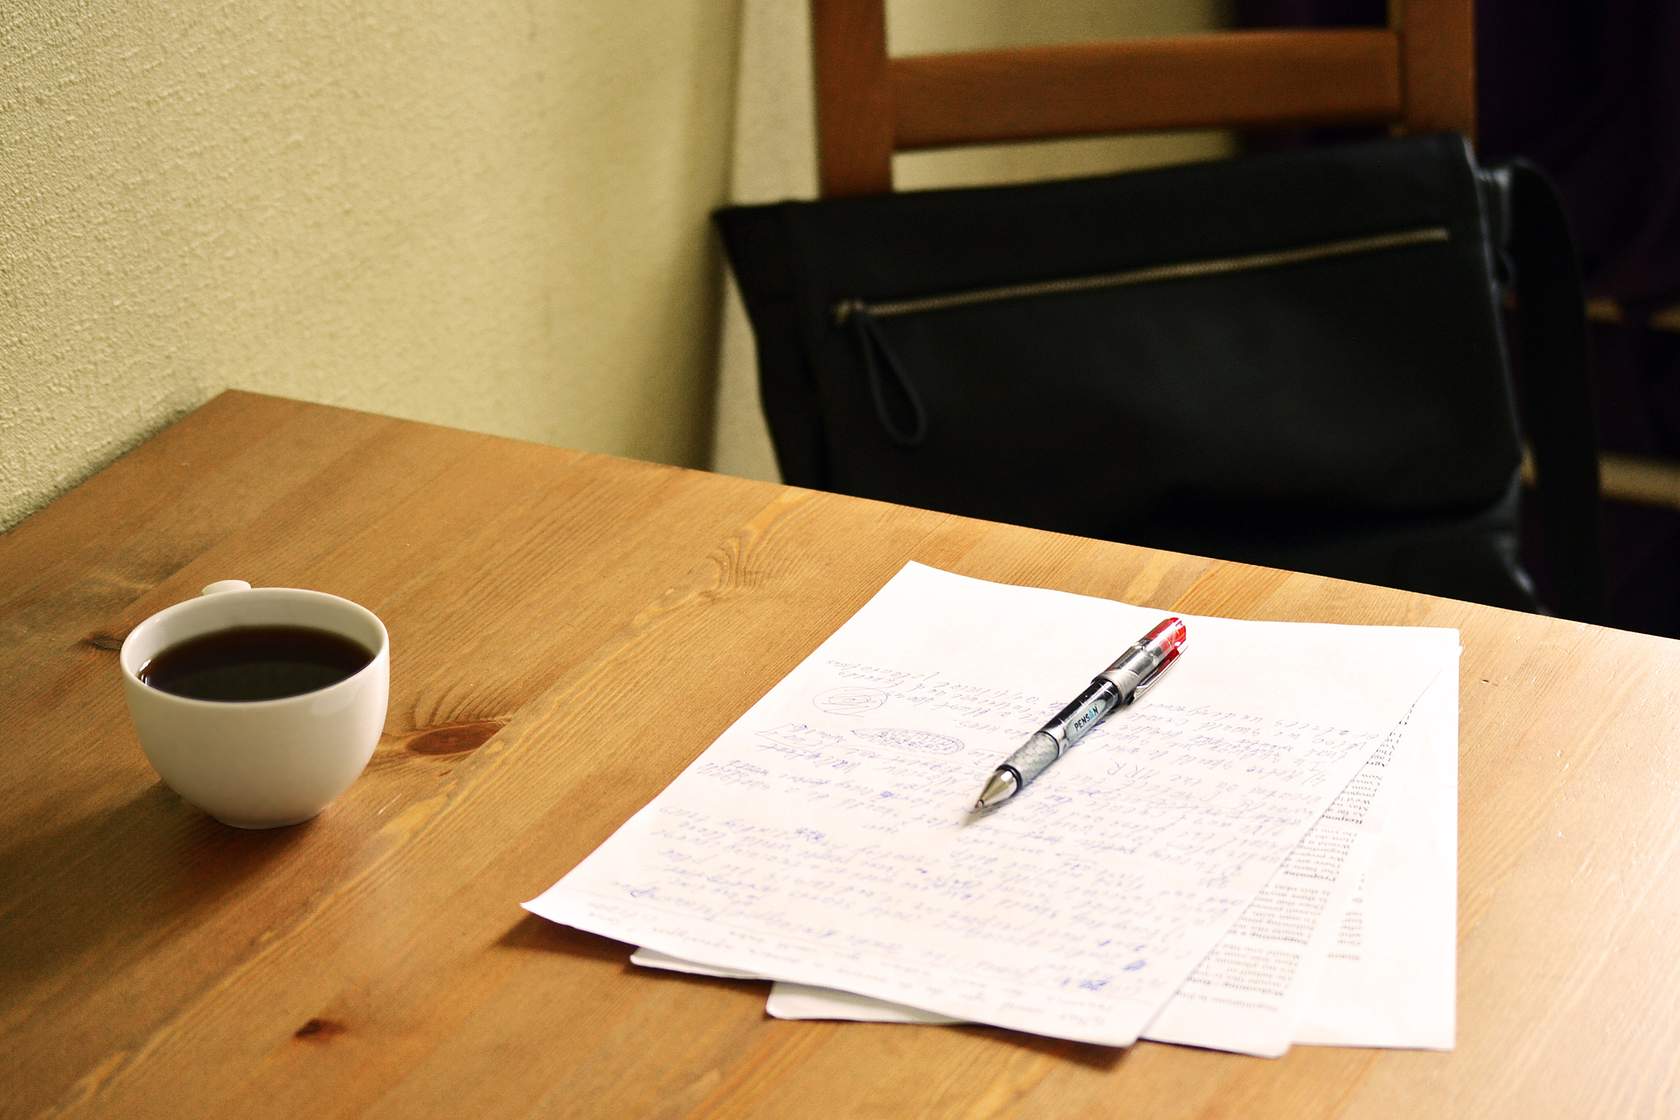 A table with paper, pen, and cup of coffee on it